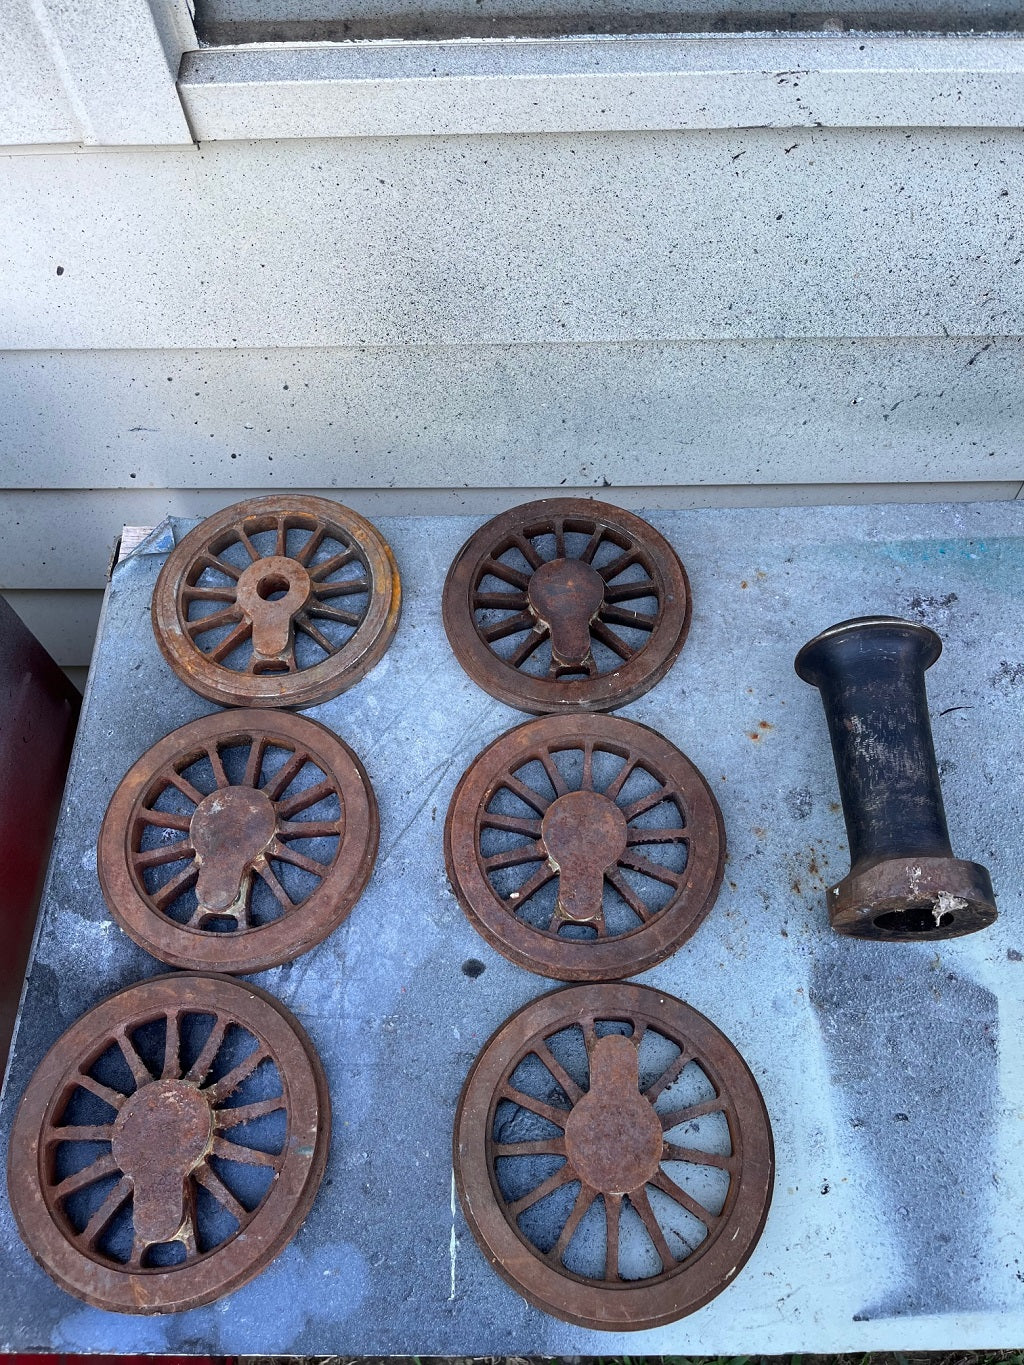 5" NSW Z19 Wheel and Chimney Castings - SOLD - S1150